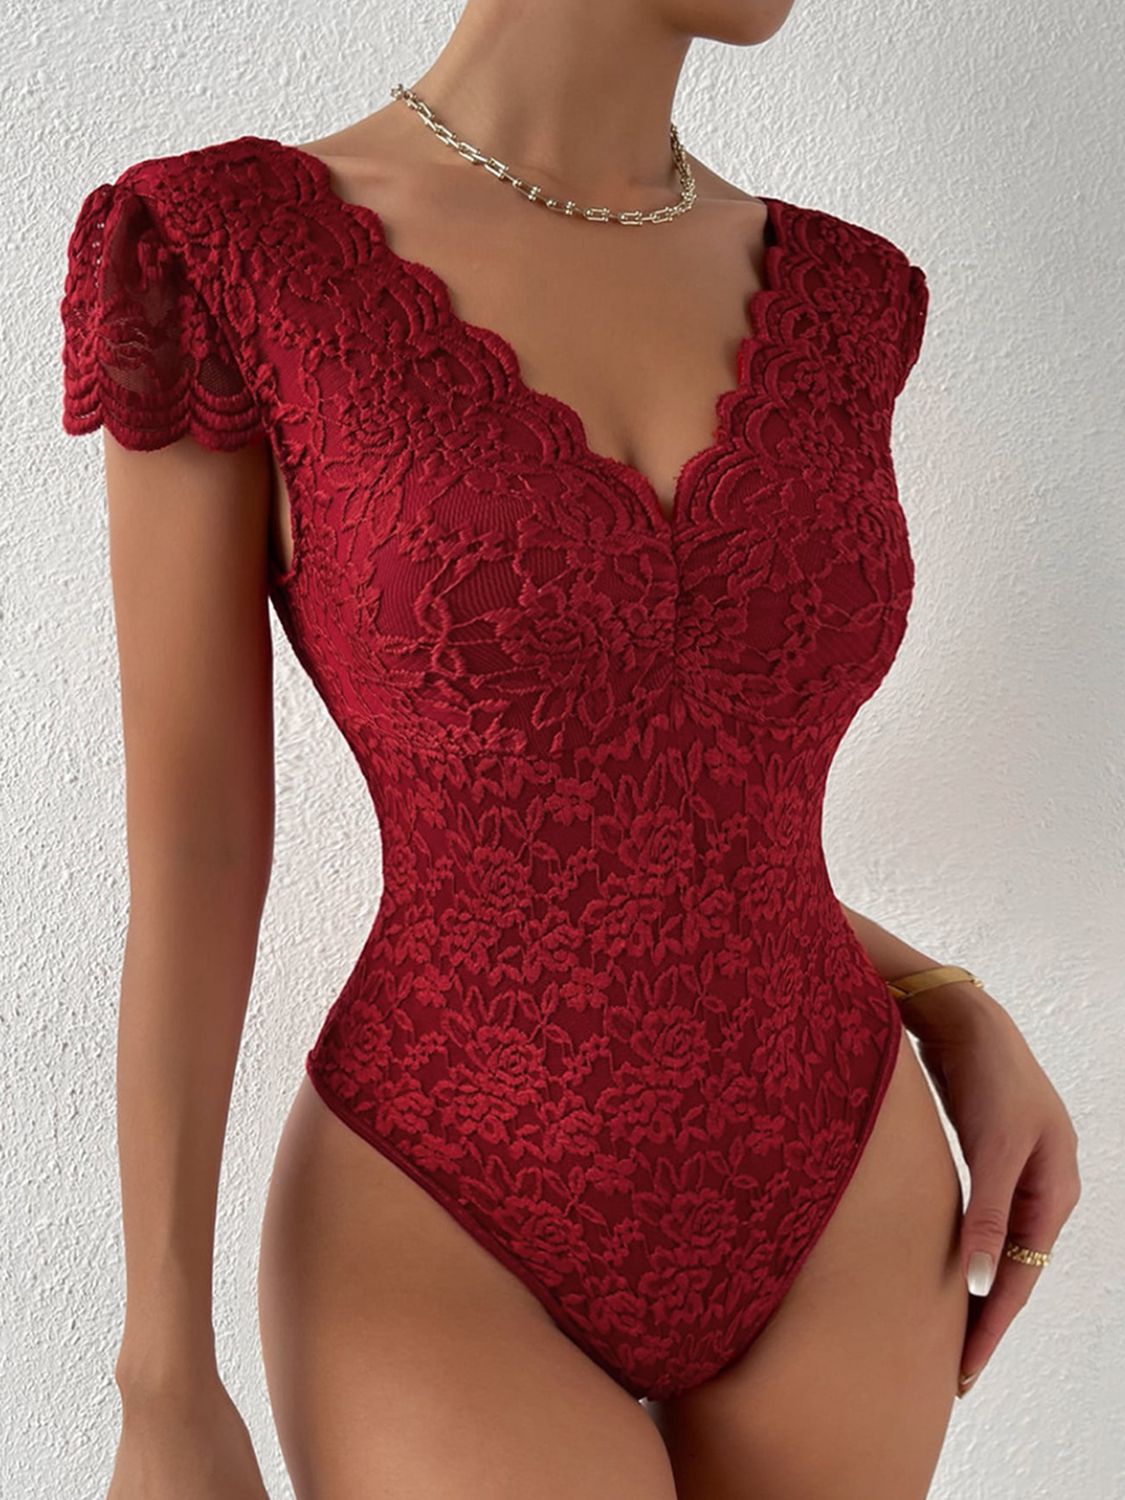 Lace Trim V-Neck Bodysuit - Red / XS - Women’s Clothing & Accessories - Shirts & Tops - 8 - 2024